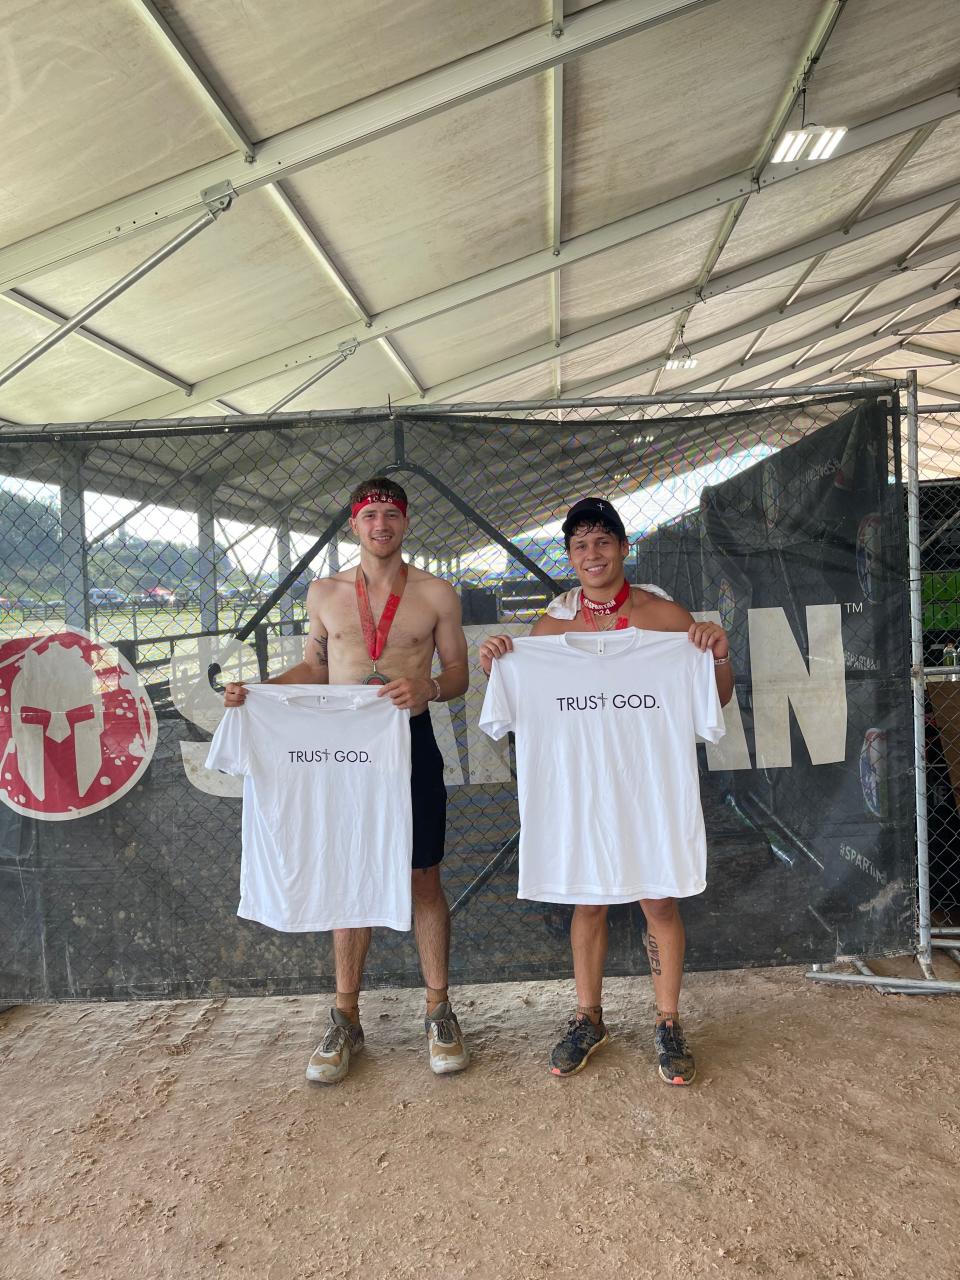 Ohio State men's basketball player Colby Baumann (left) and his friend Vic Ponce pose with shirts from Baumann's "LLP Clothing" line after running a Spartan Race.